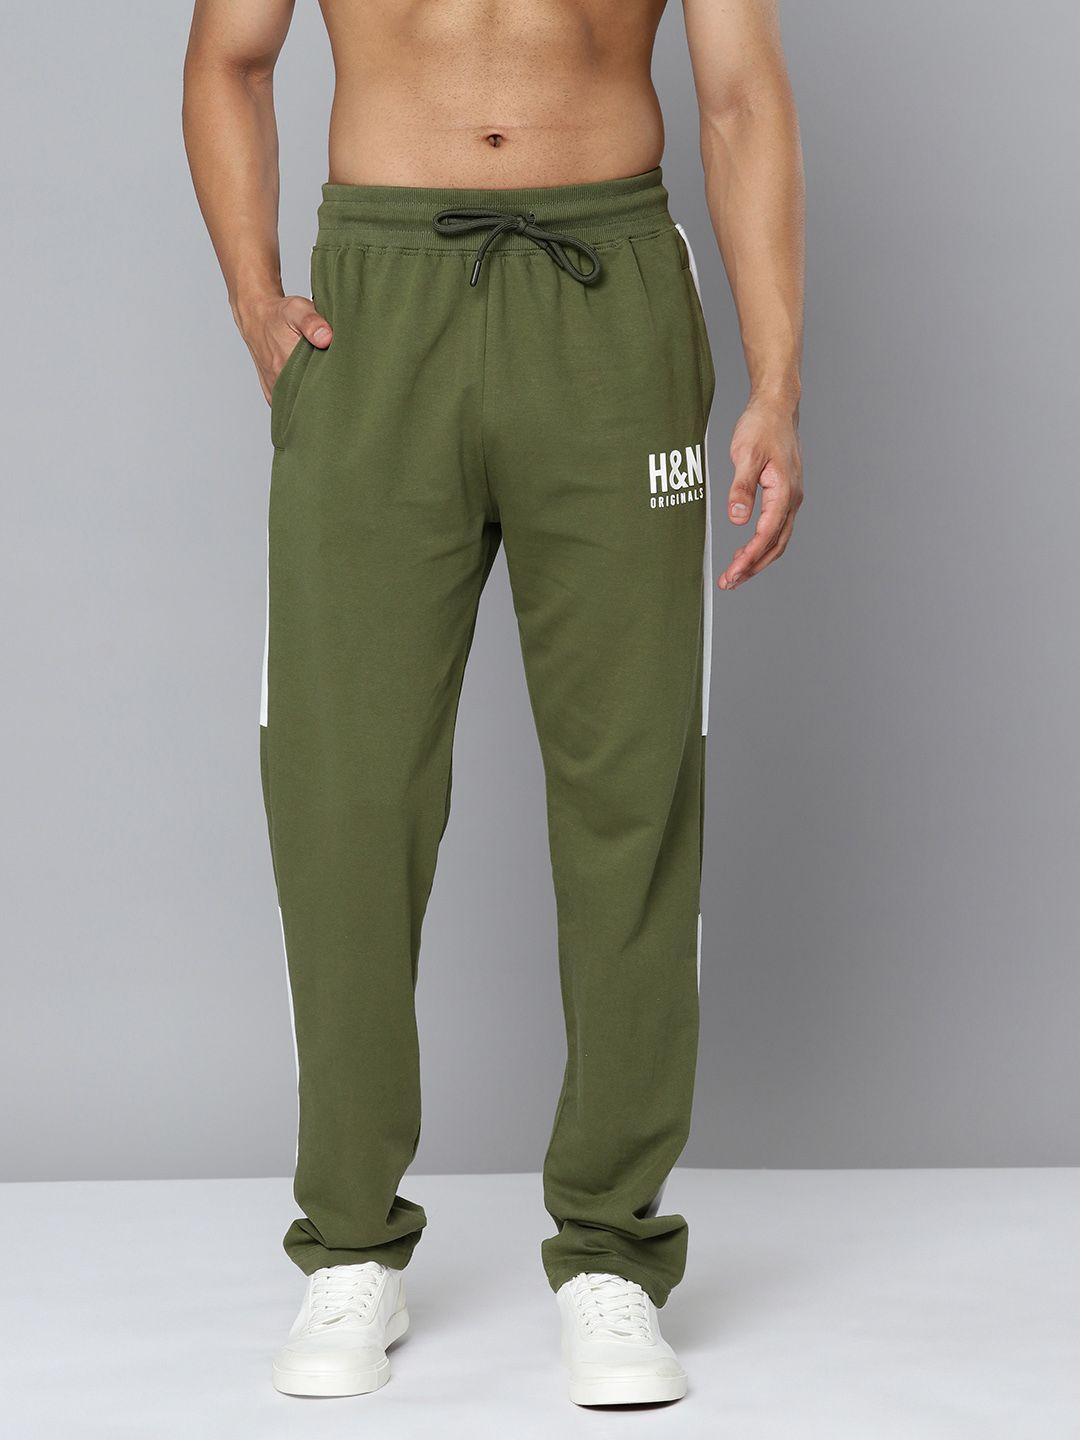 here&now men side striped detail track pants